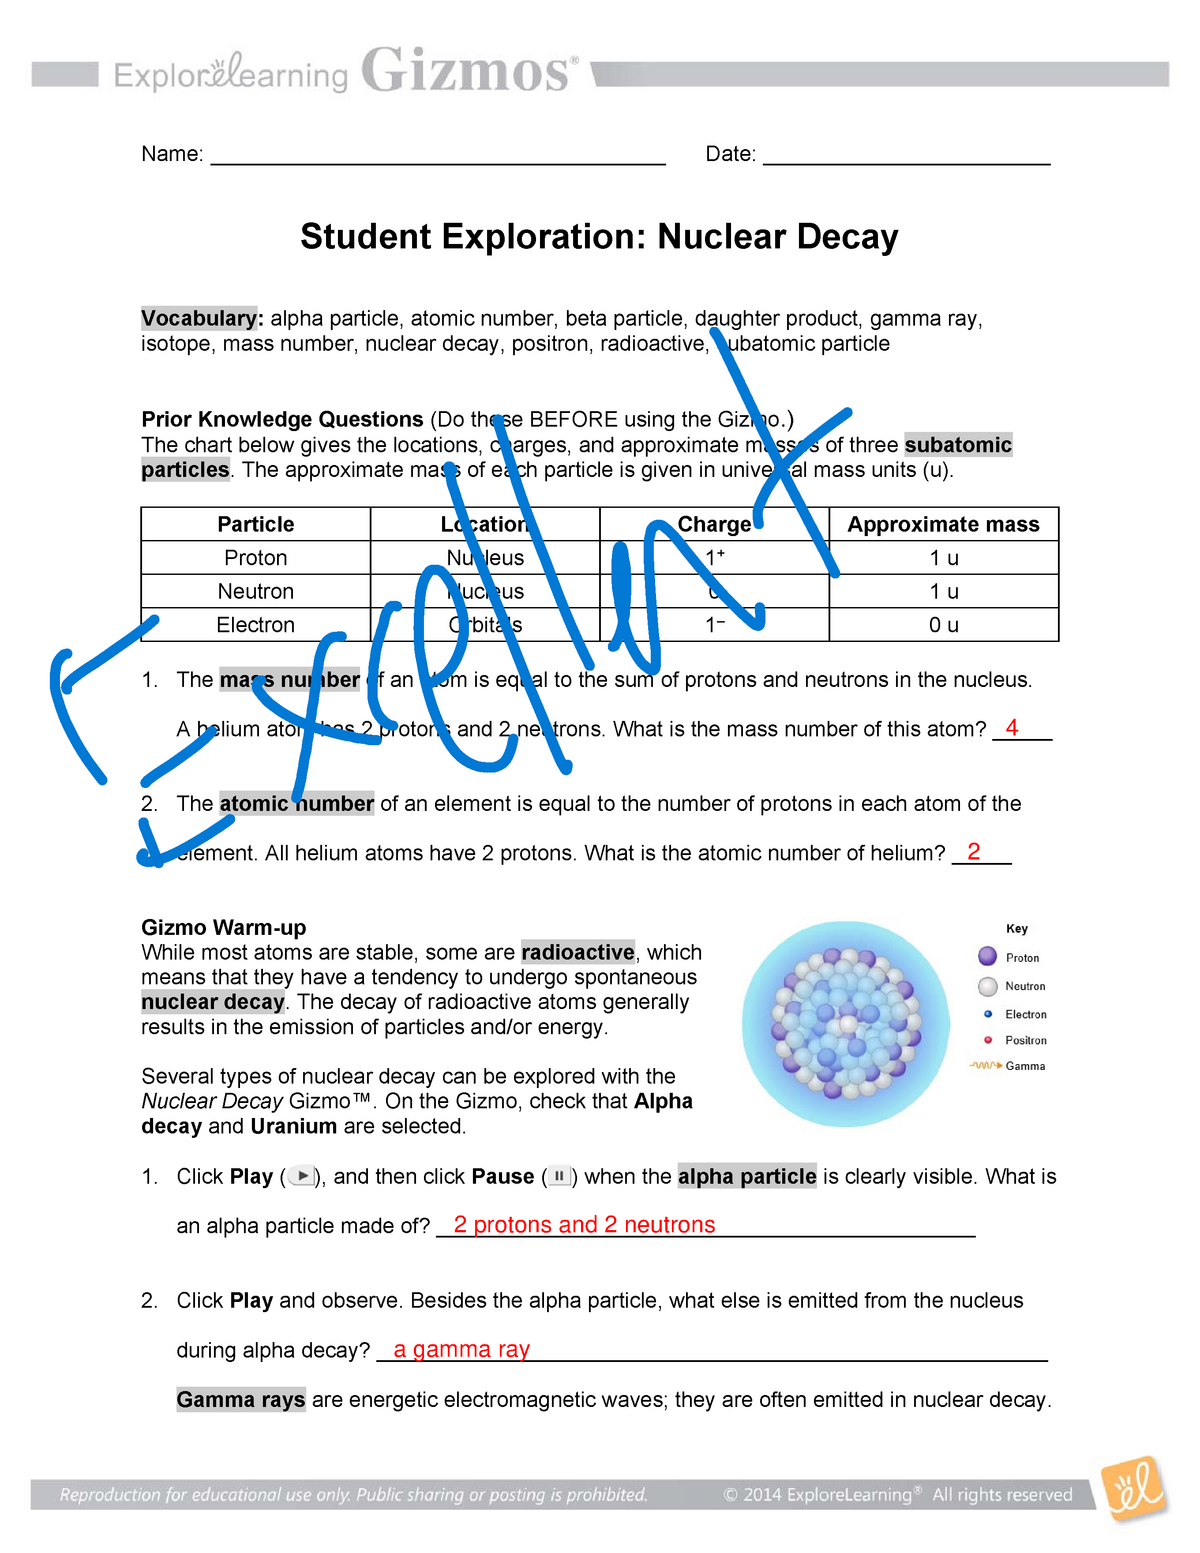 Radioactive Decay Worksheet 2 Answers